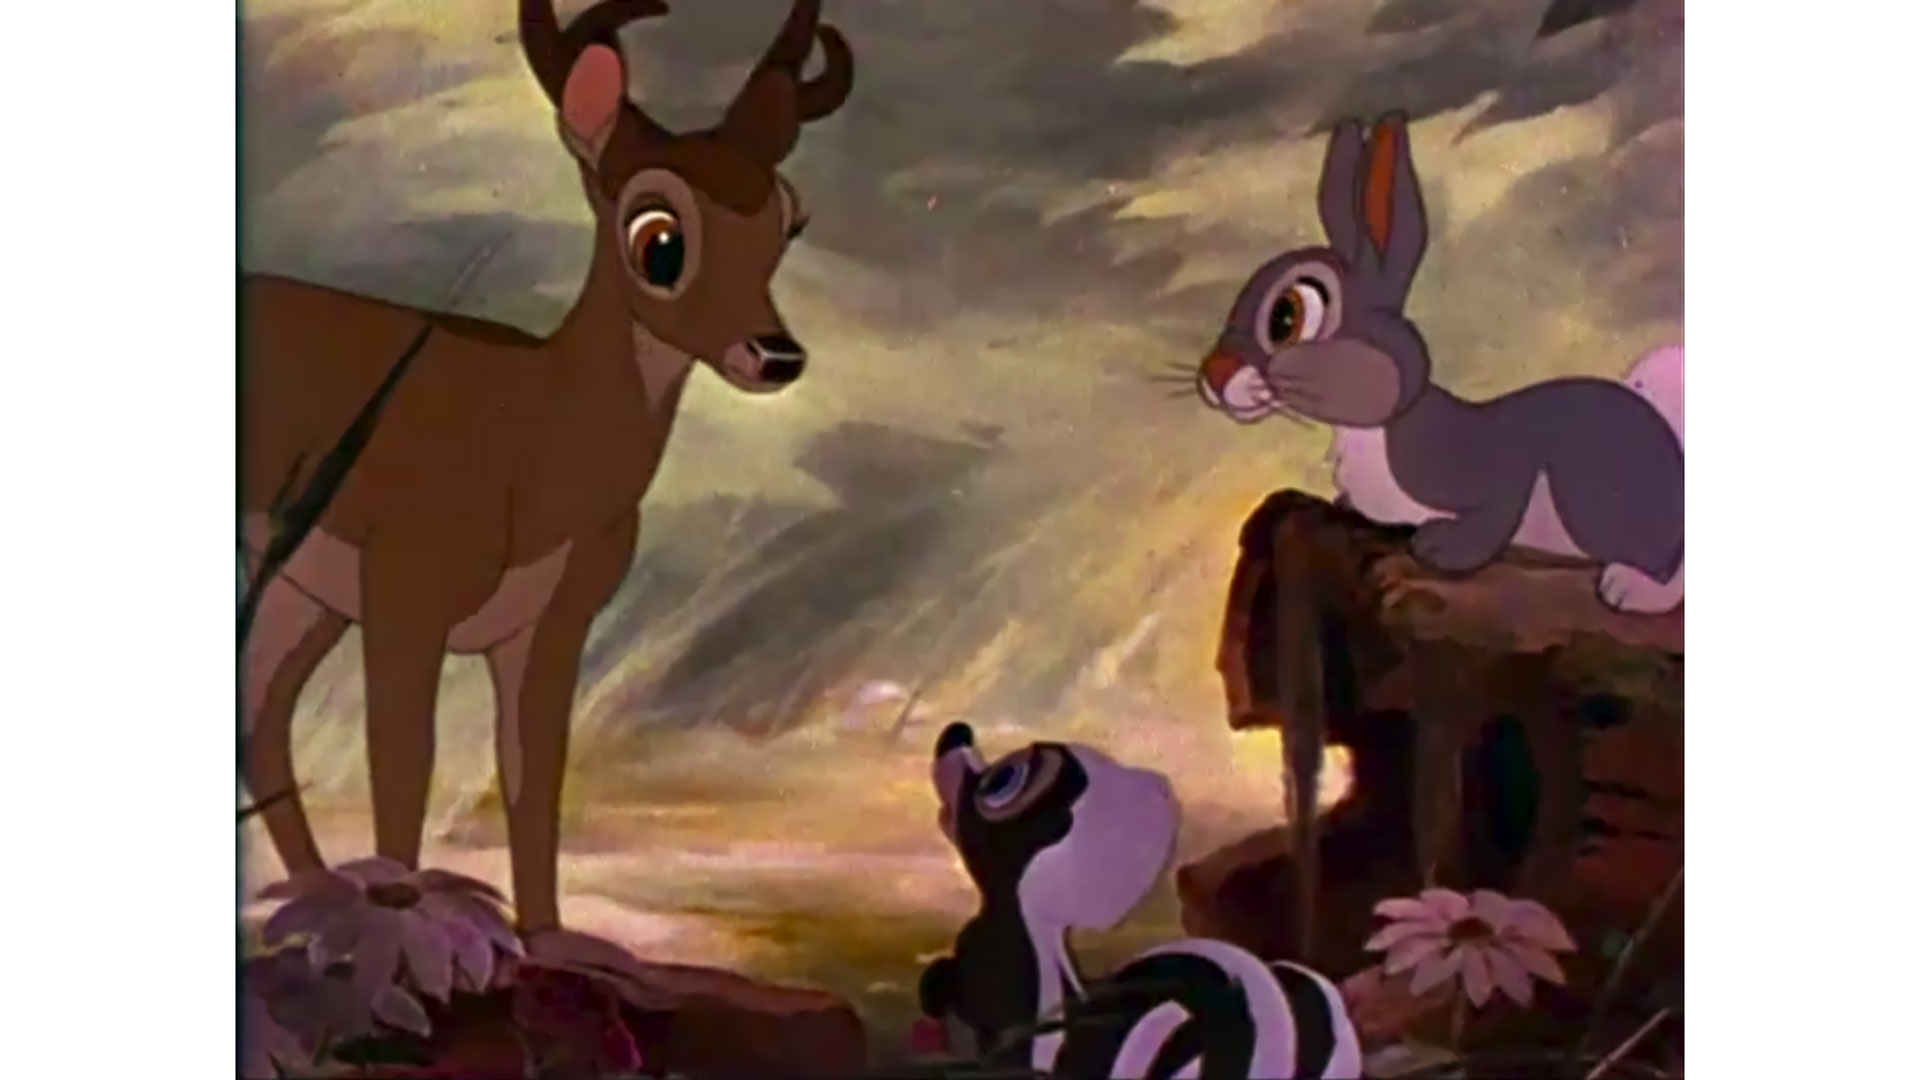 still from animated motion picture "bambi"